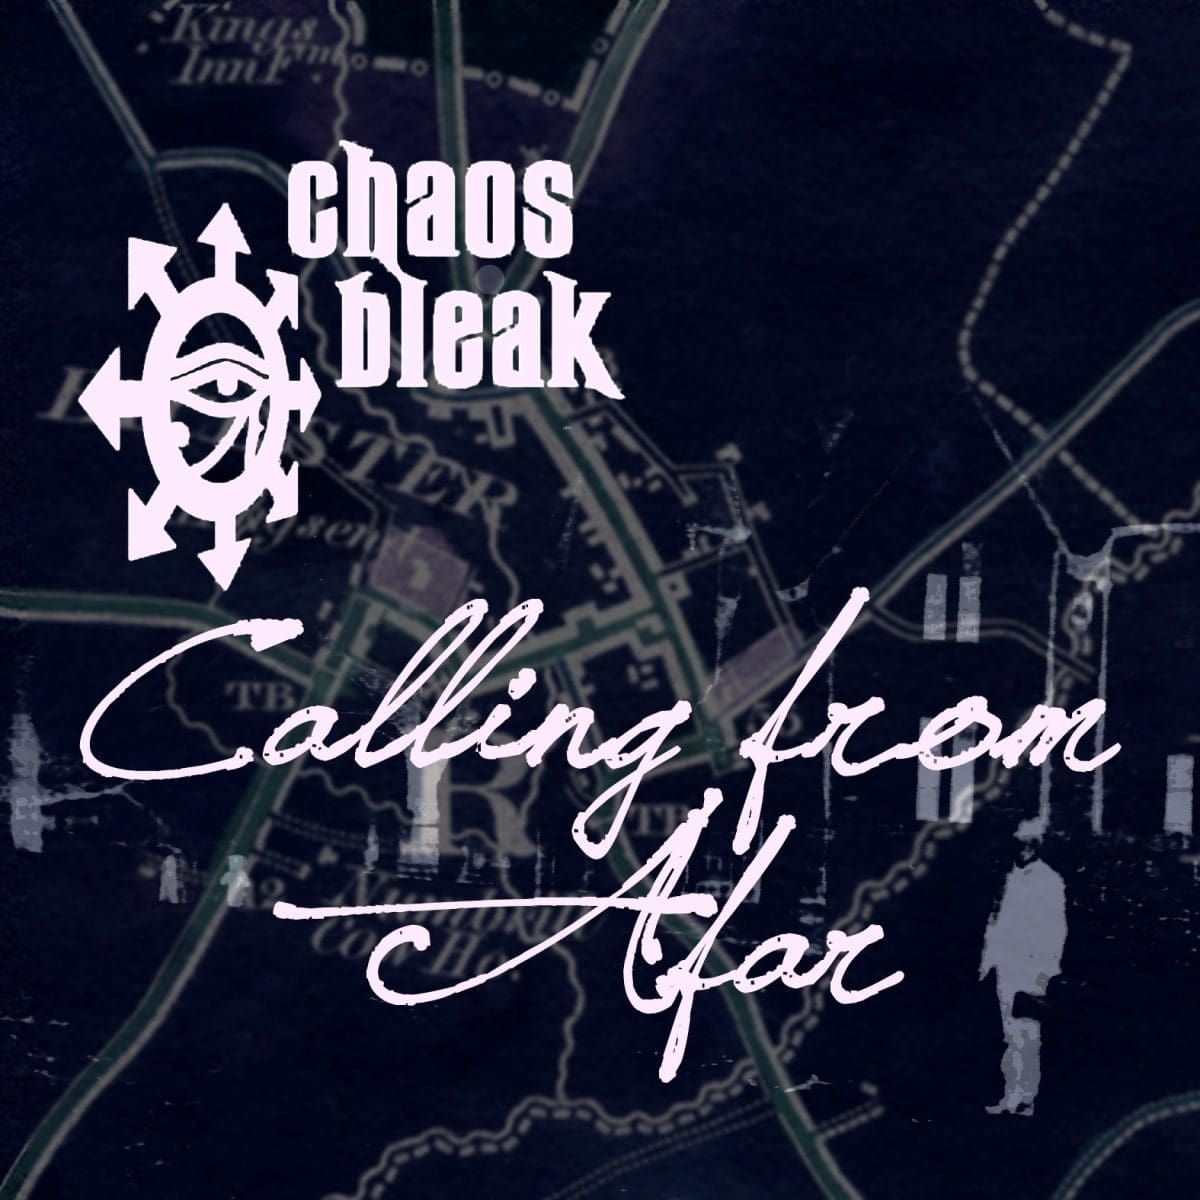 Post-punk act Chaos Bleak returns with an all new single